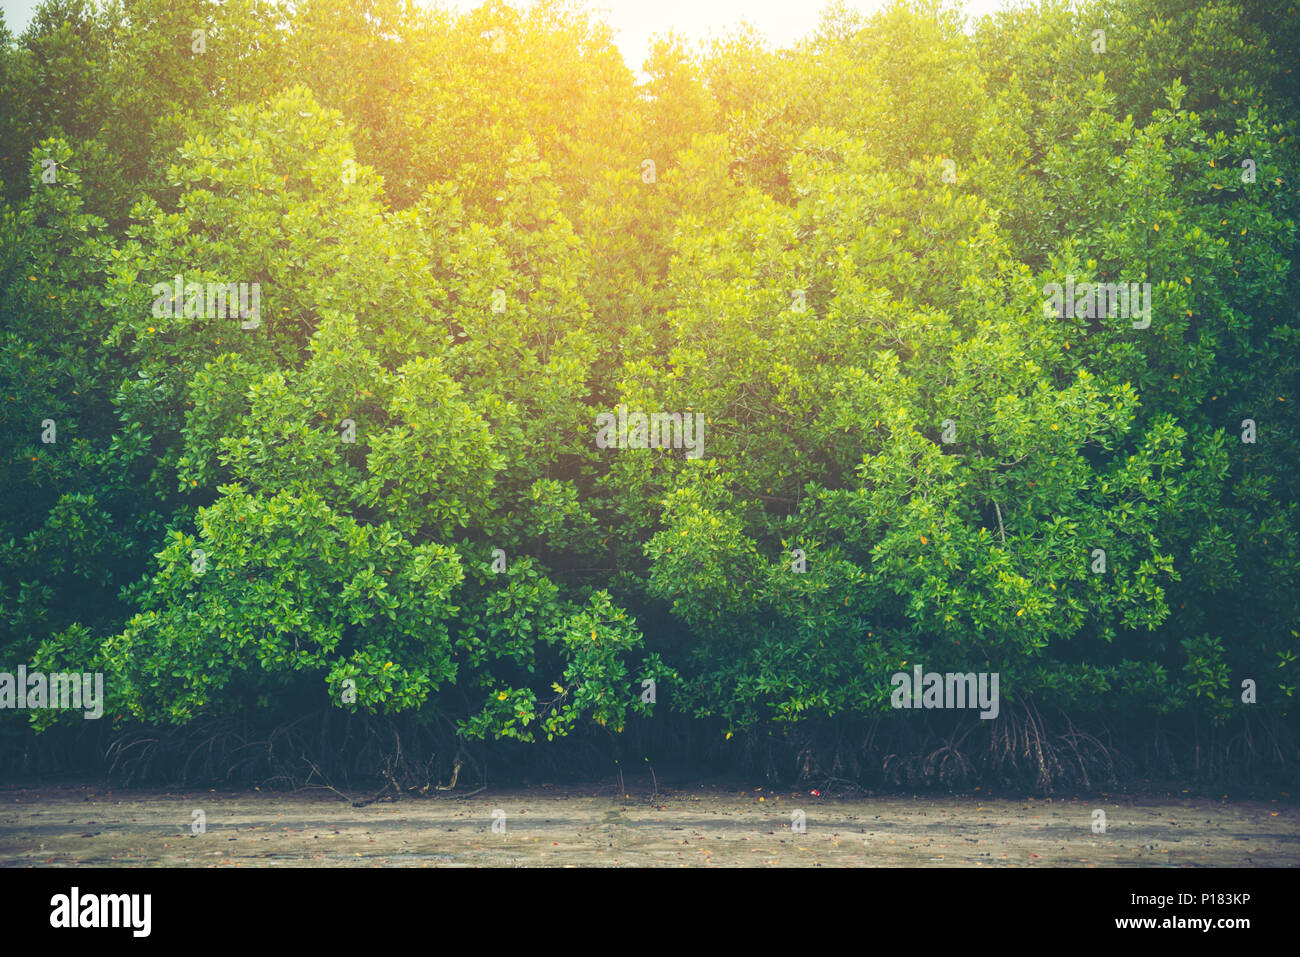 ecological system of tropical mangrove forest in Thailand Stock Photo